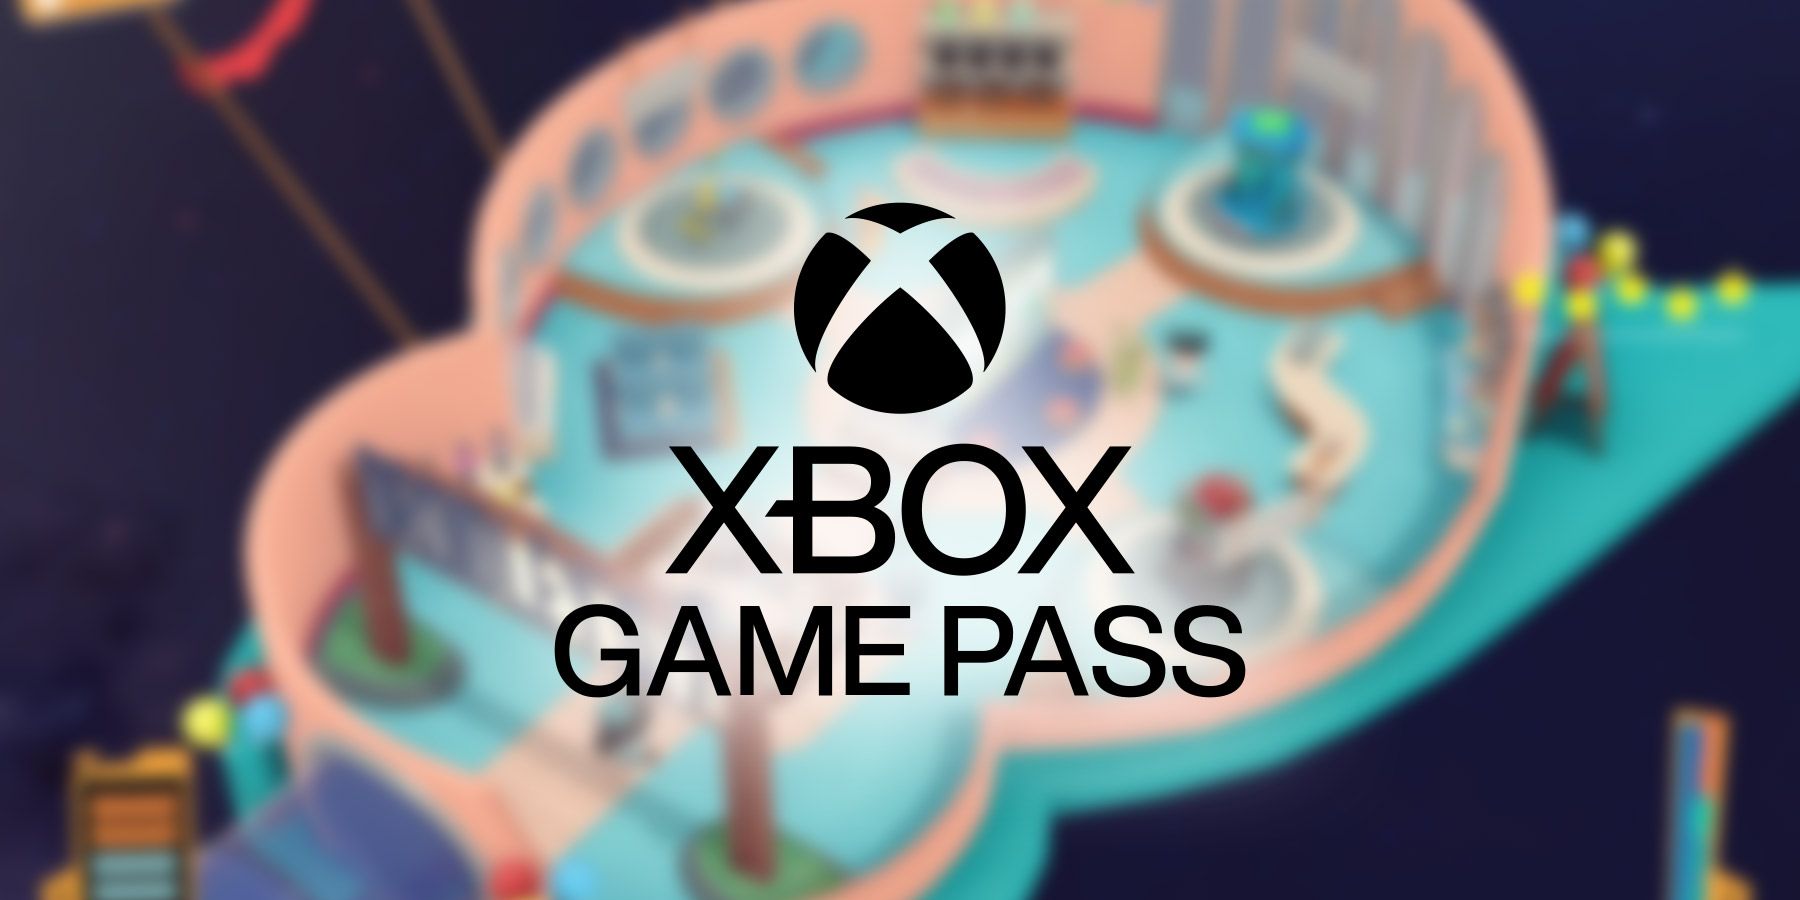 Xbox Game Pass Just Added Some Great Co-Op Games